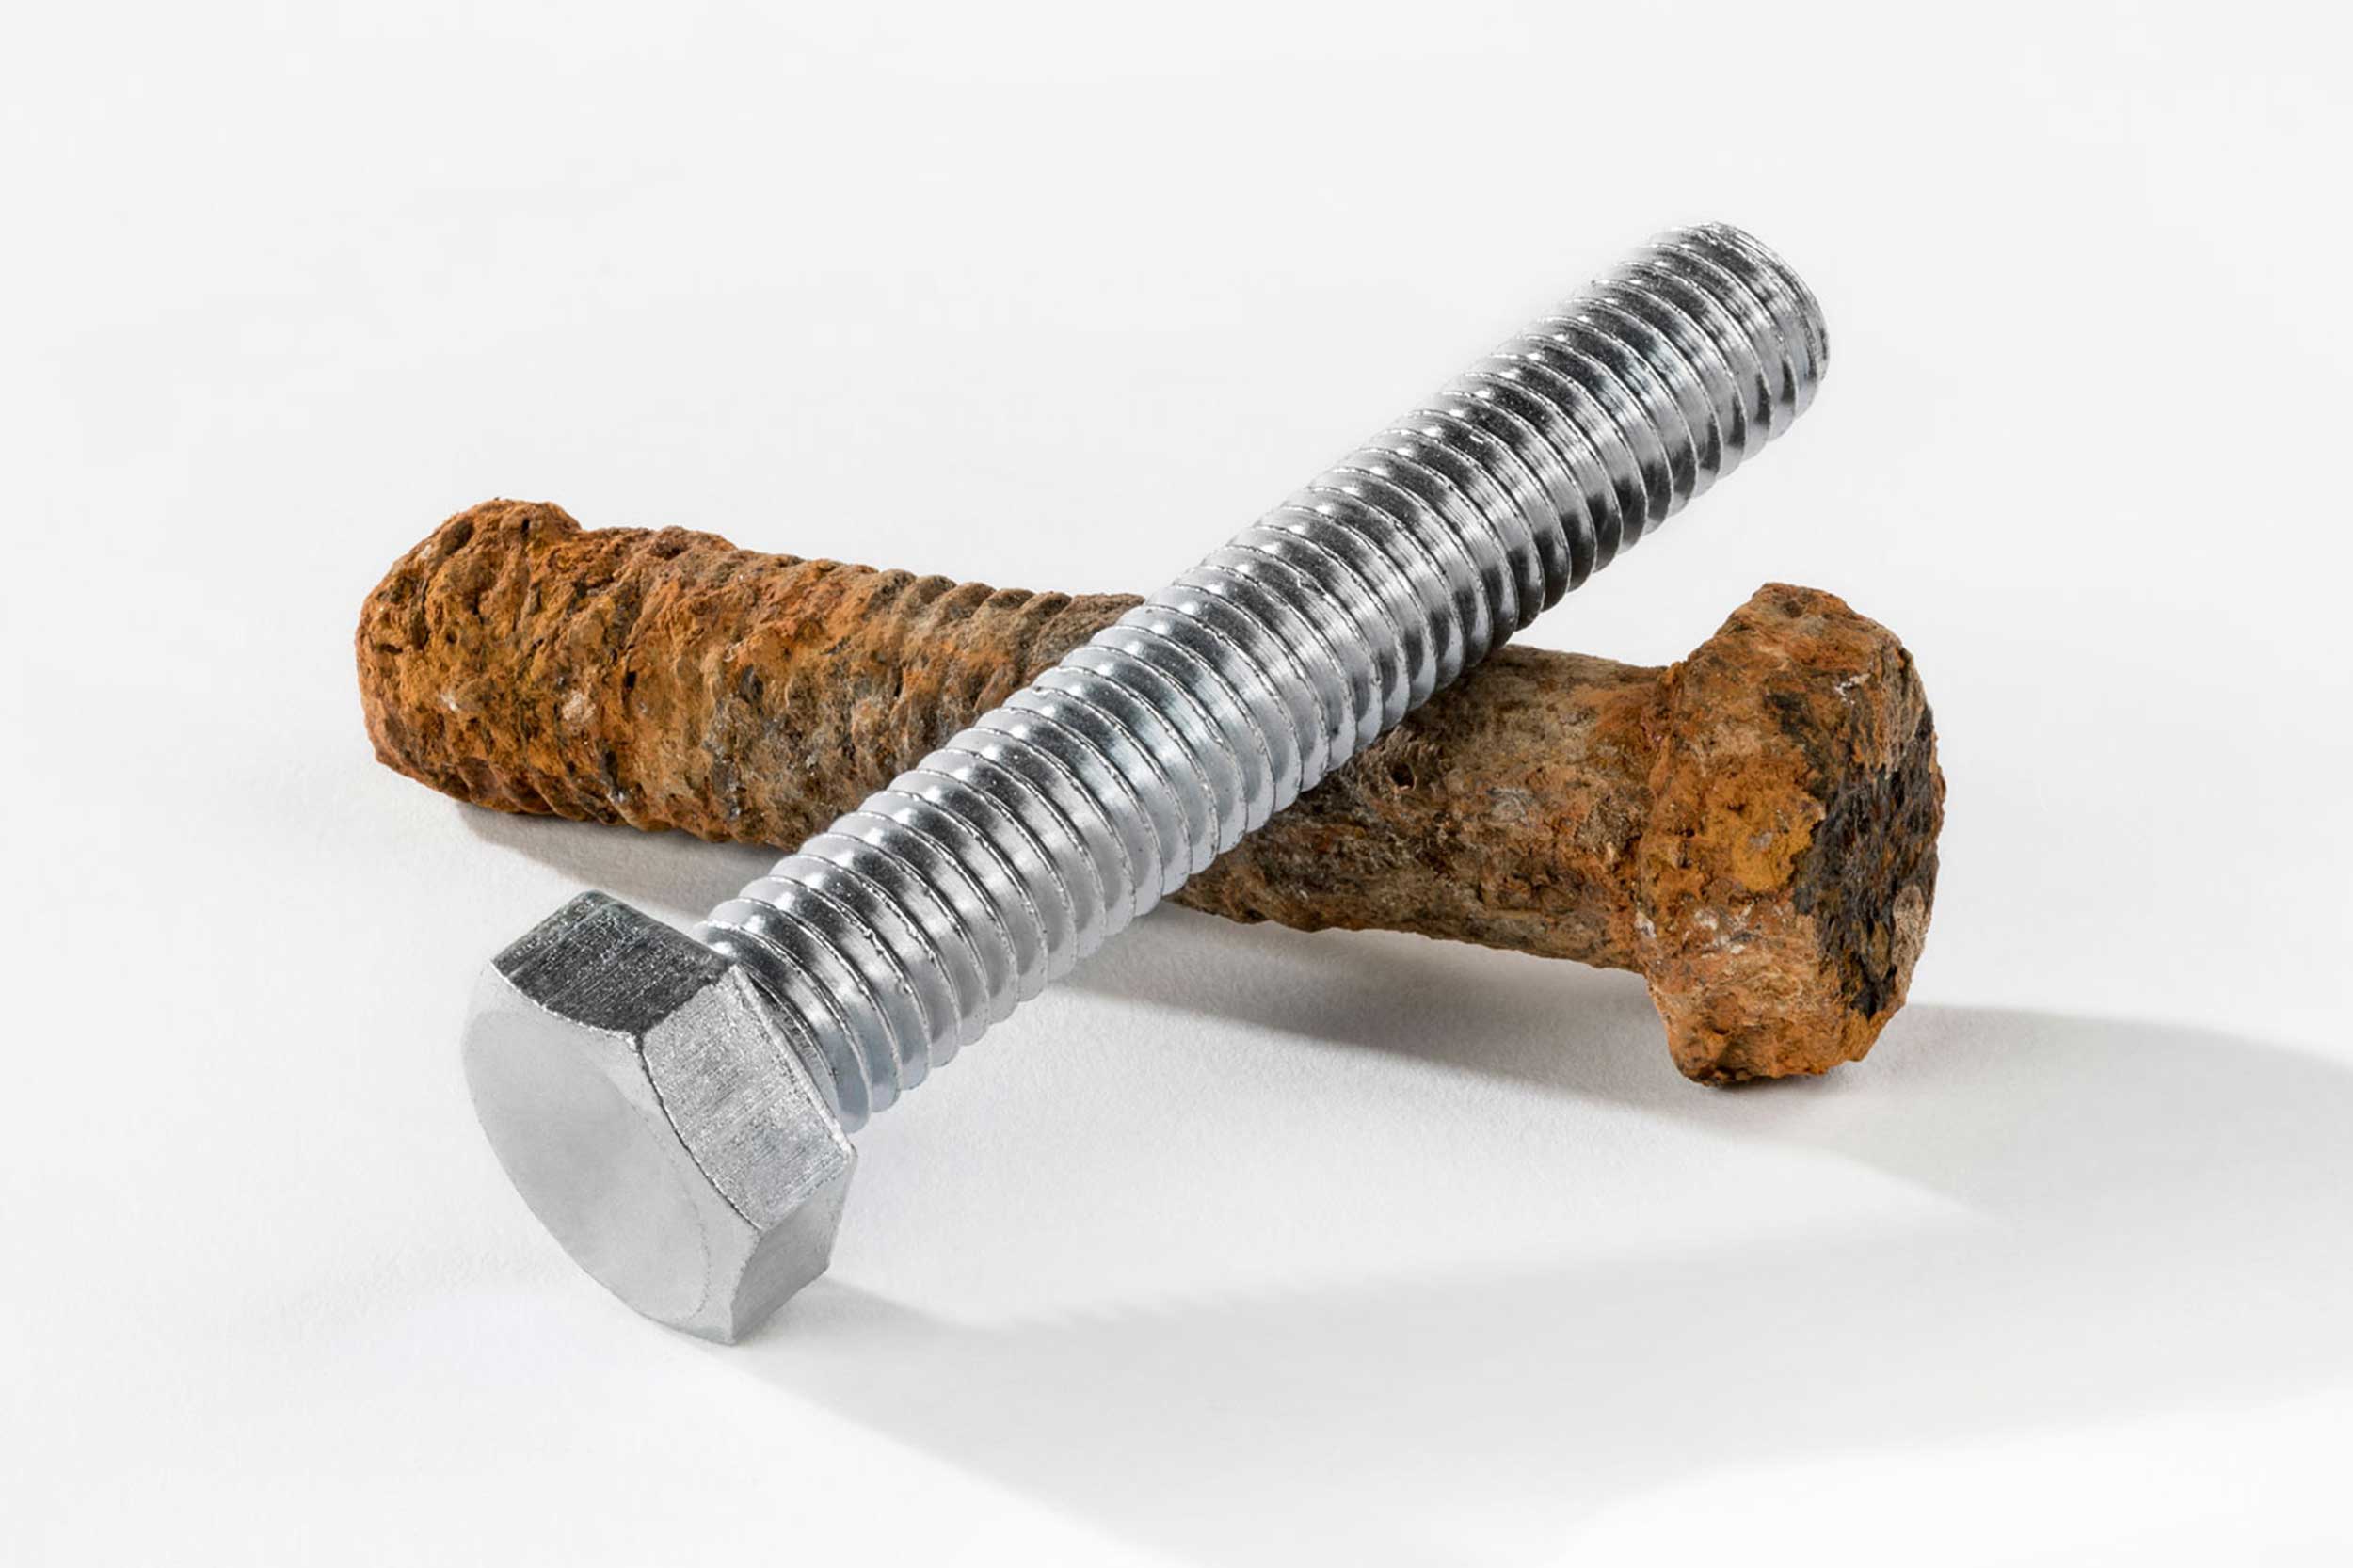 stock image of a brand new metal screw next to a very rusty, corroded screw of the same size